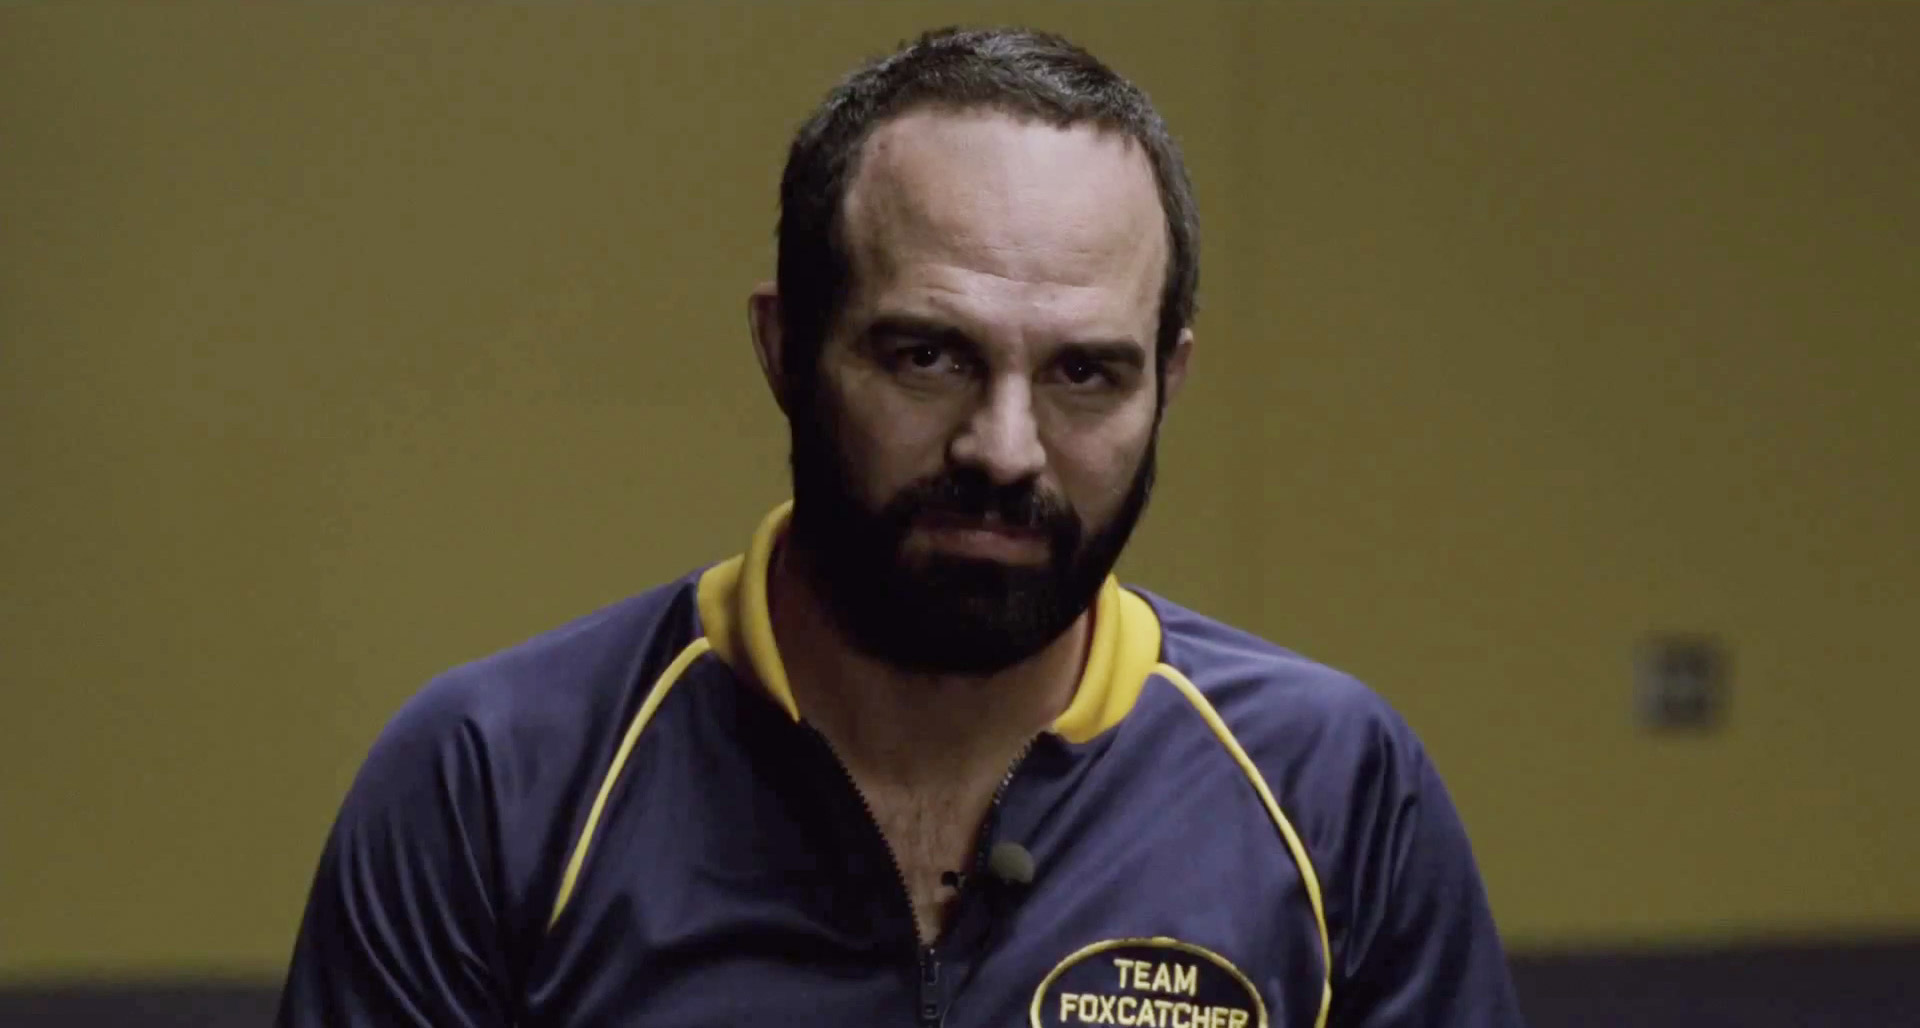 chilling-first-trailer-for-foxcatcher-with-steve-carell-5.jpg